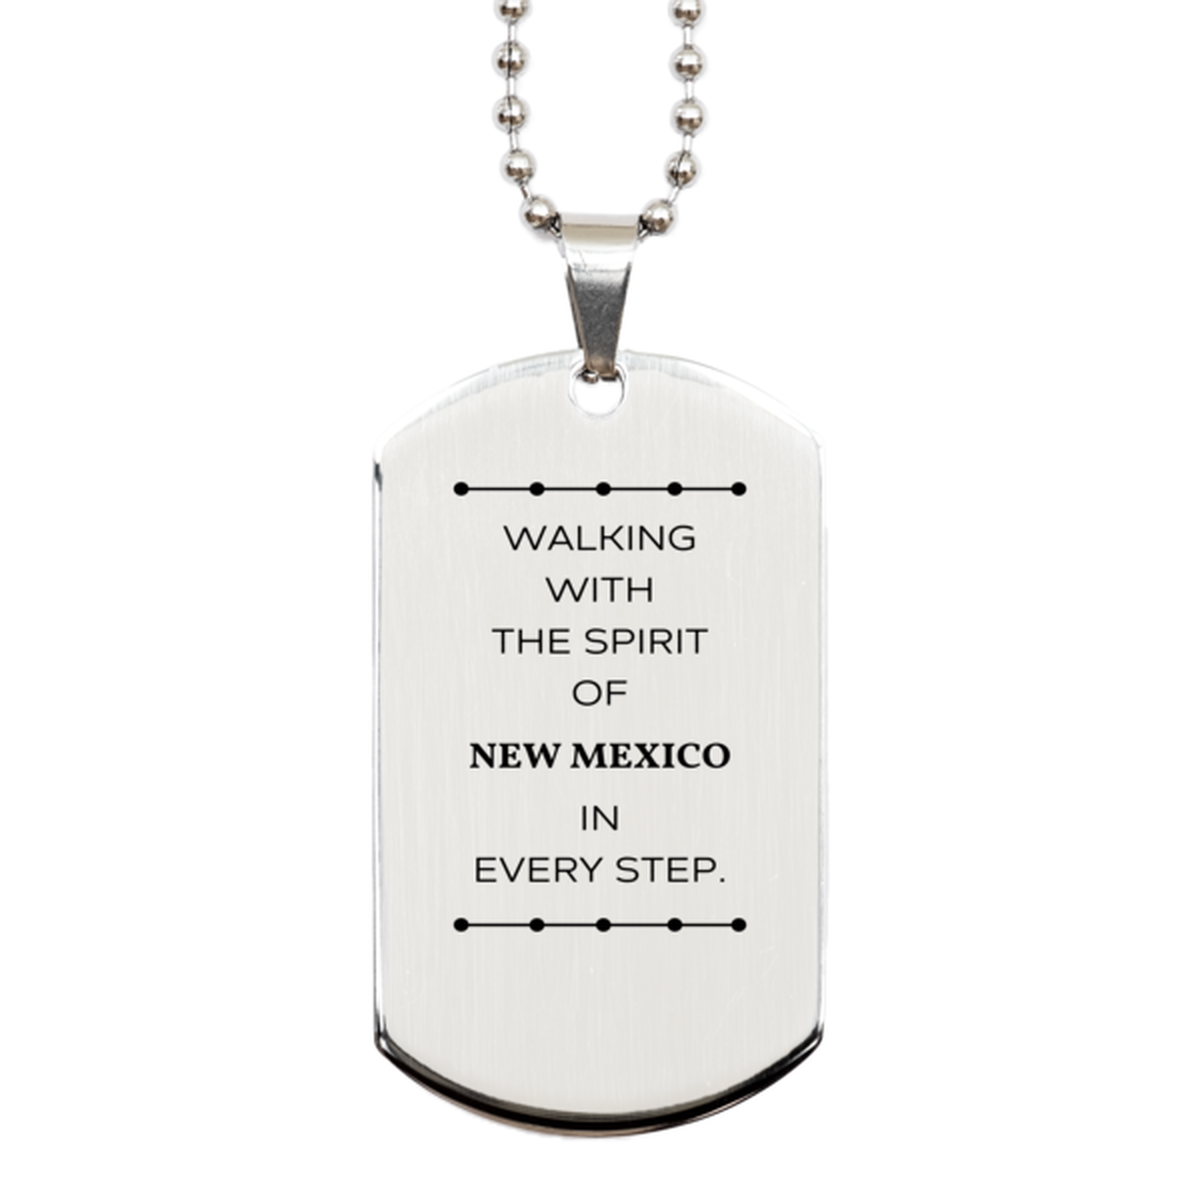 New Mexico Gifts, Walking with the spirit, Love New Mexico Birthday Christmas Silver Dog Tag For New Mexico People, Men, Women, Friends